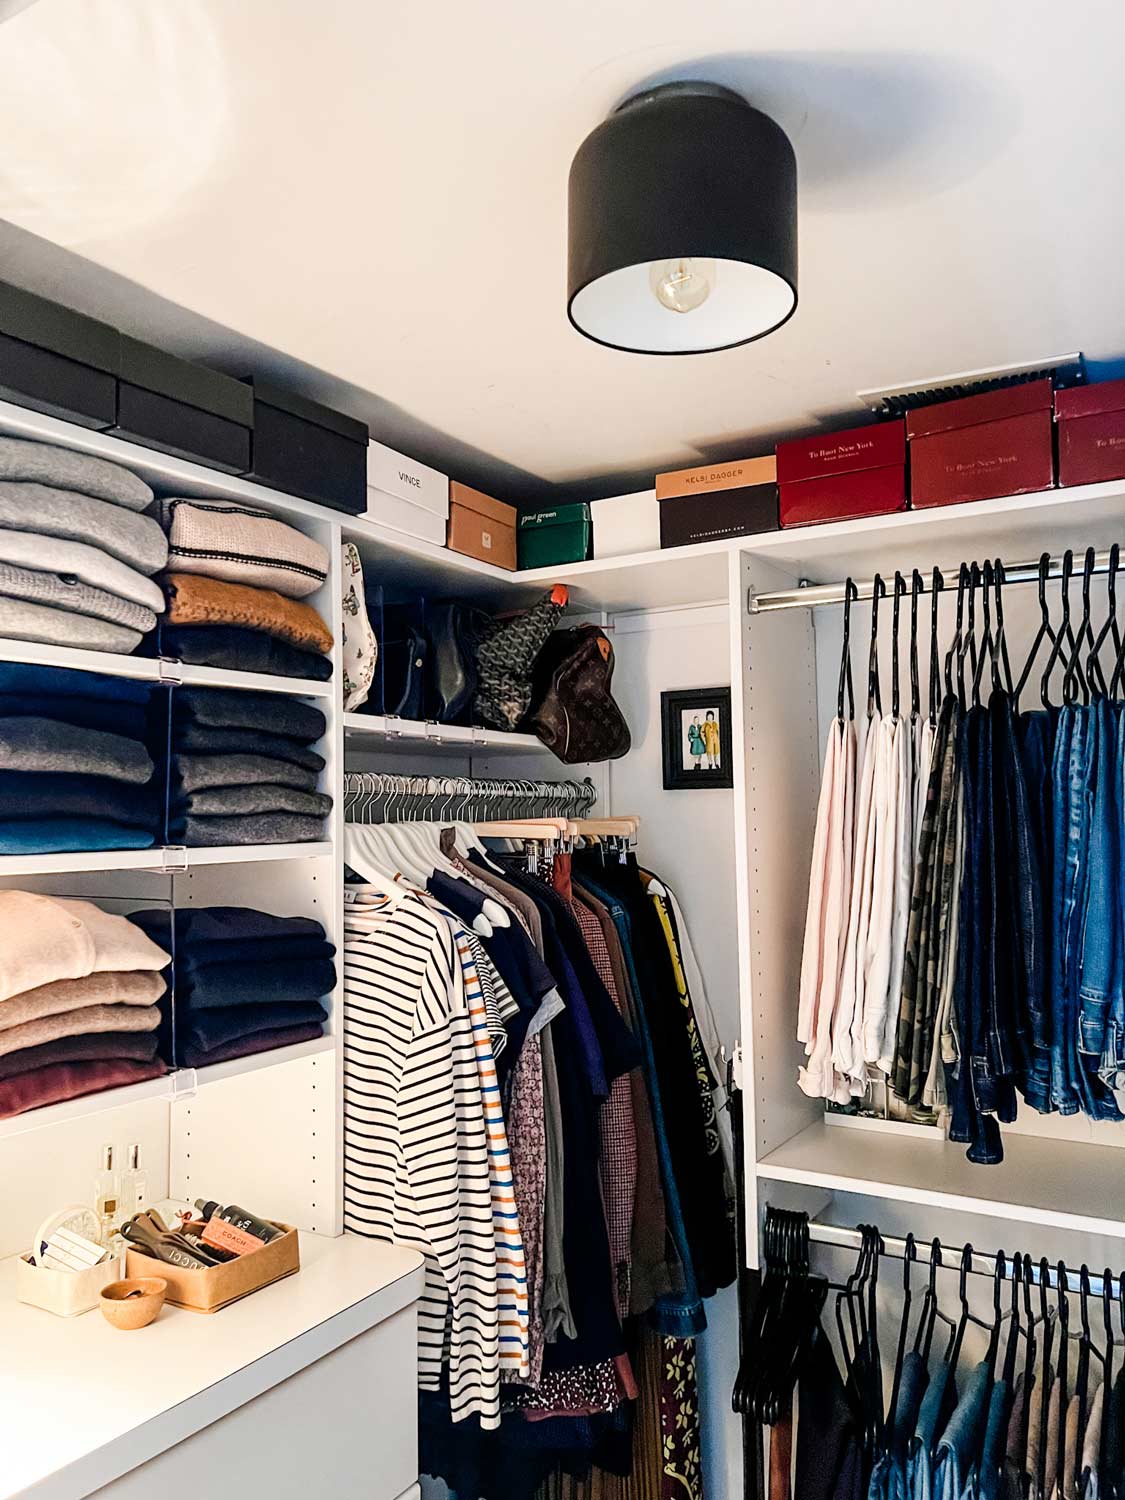 How To Marie Kondo Your Closet: 4 Tips for Getting Started